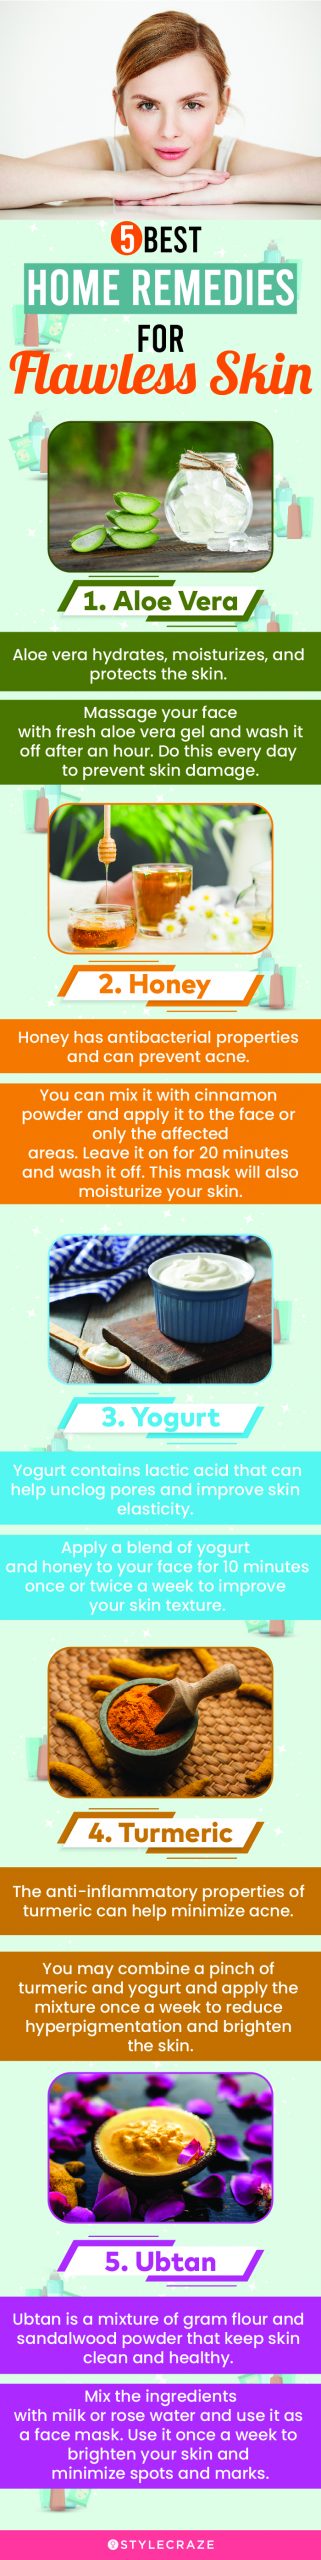 5 best home remediesfor flawless skin(infographic)